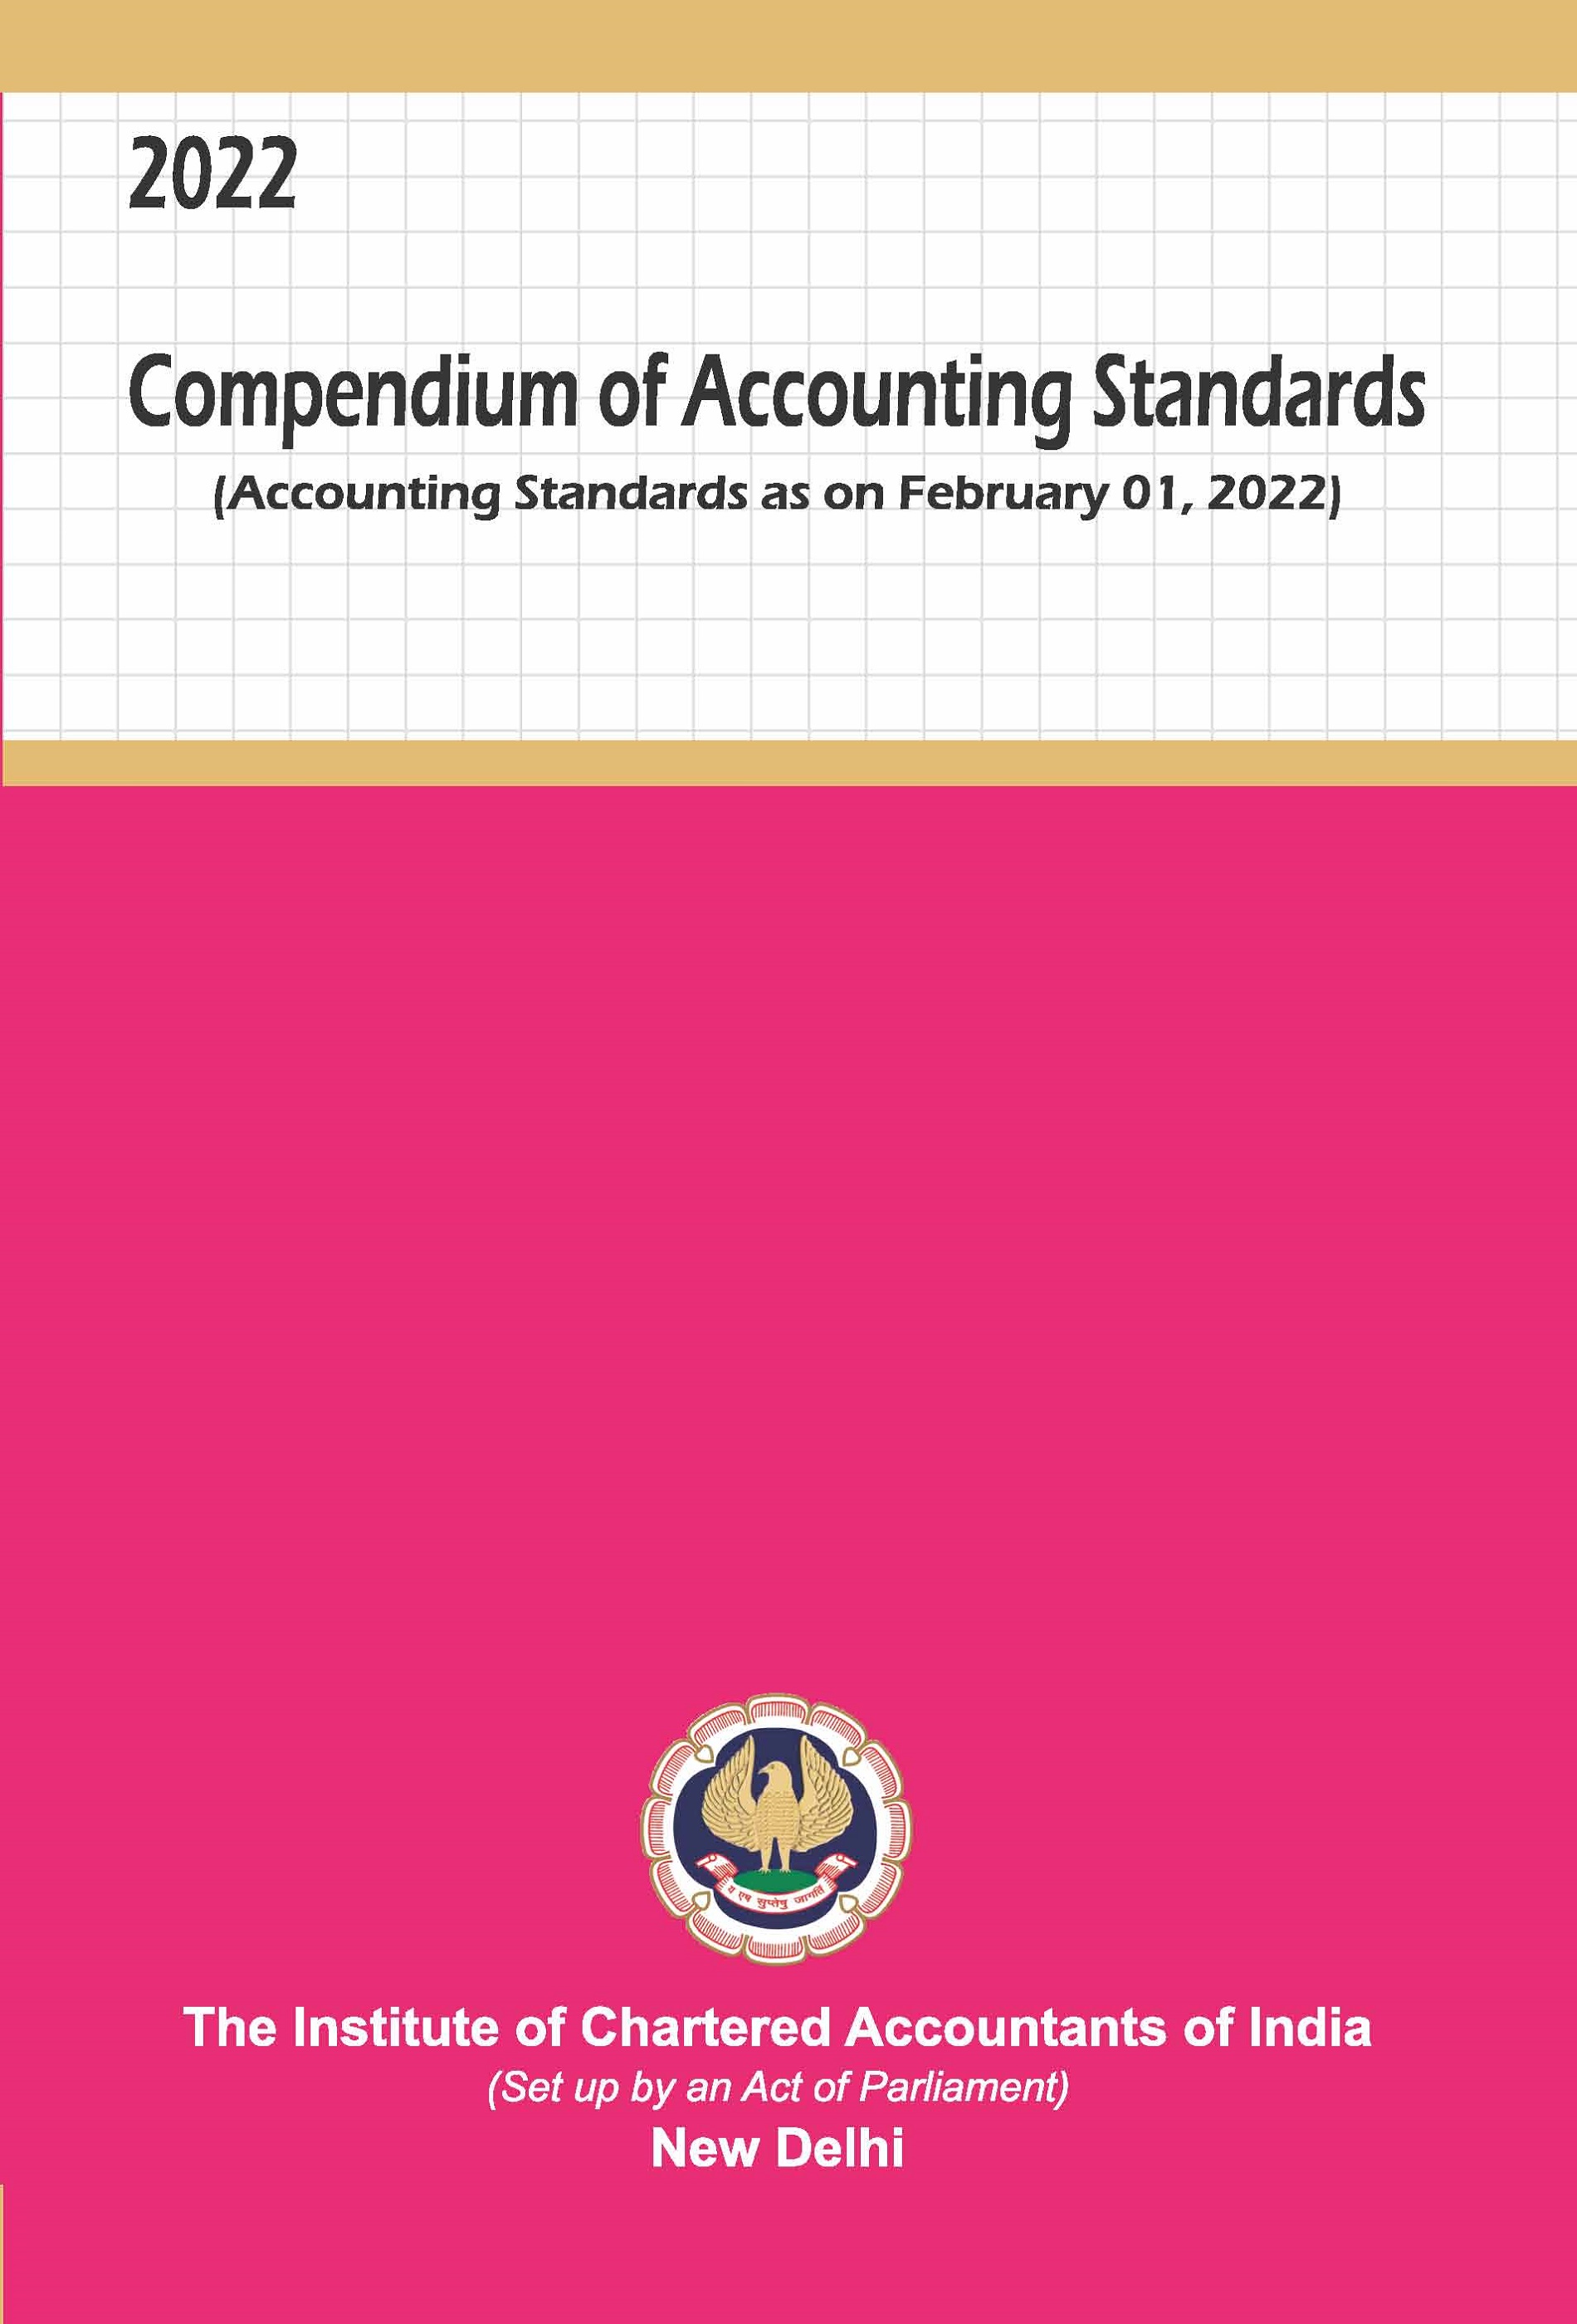 Compendium of Accounting Standards (Accounting Standards as on February 01, 2022)